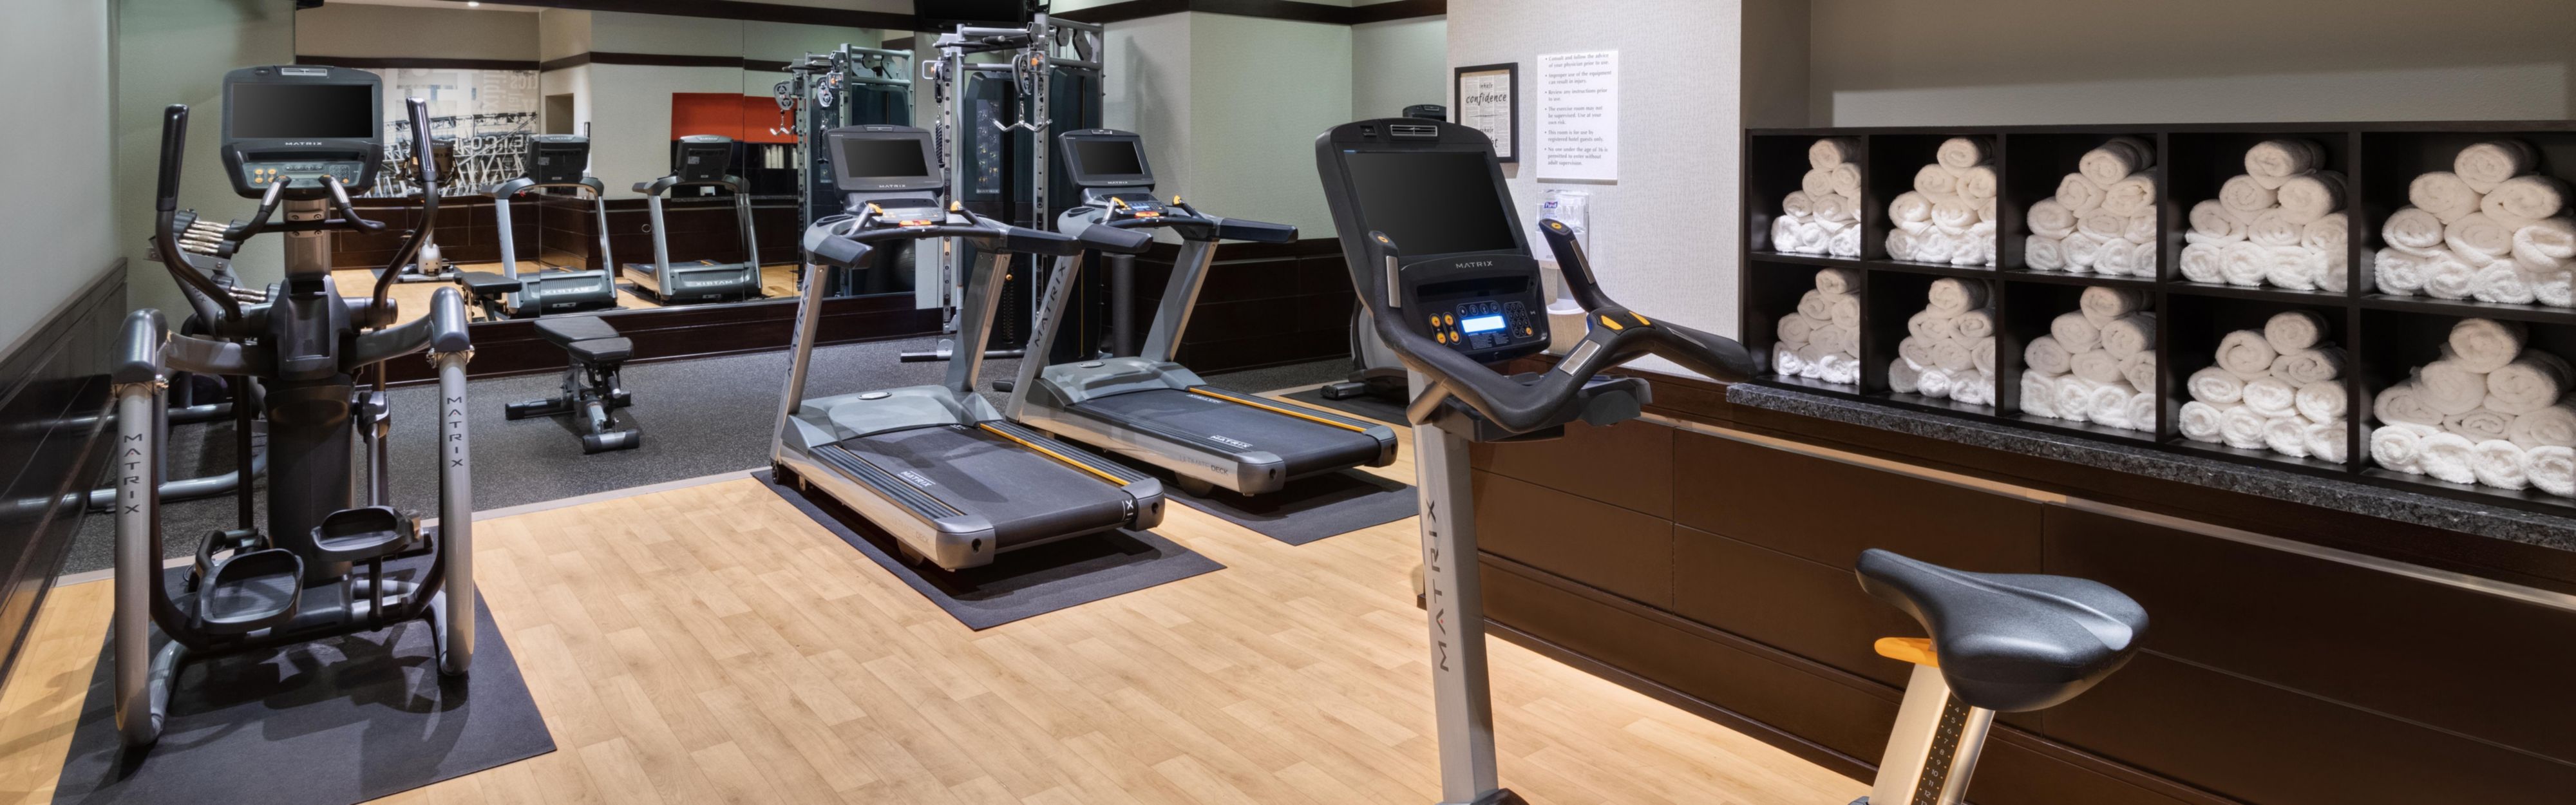 Modern Fitness Room with Extensive Options